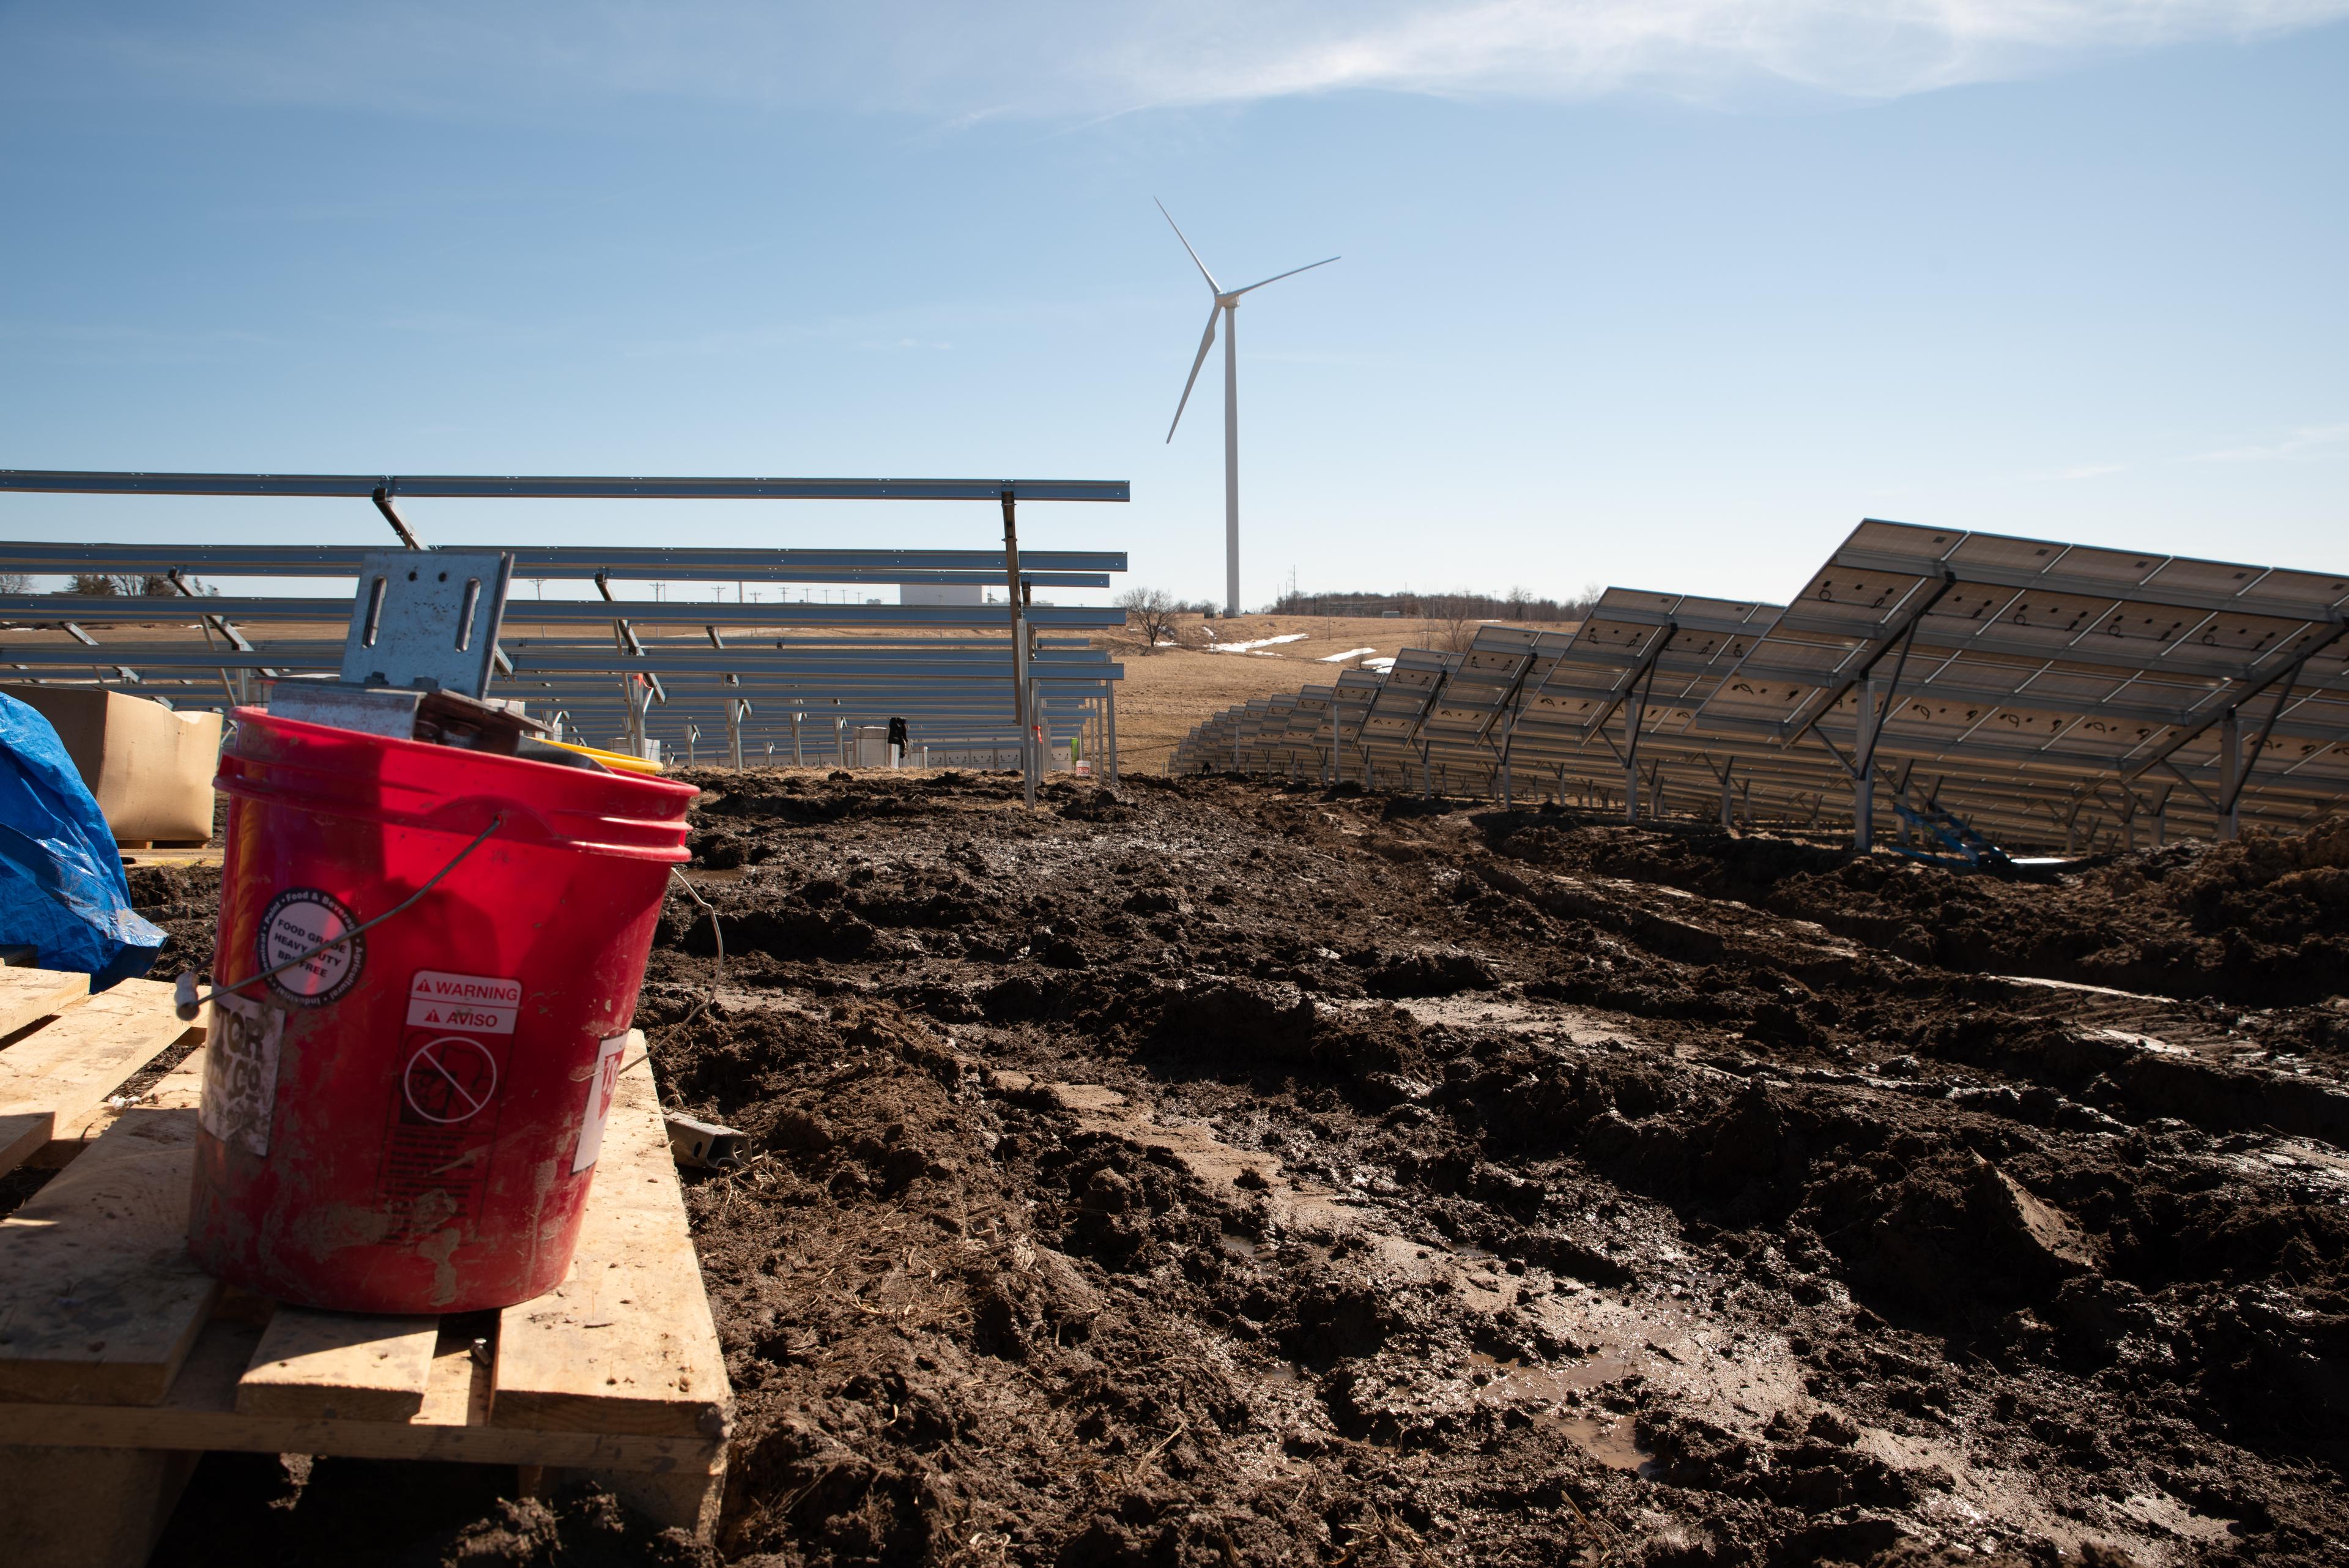 A red bucket on a table overlooking a field of churned, muddy ground, with partially assembled solar panels in rows and a wind turbine in the distance.